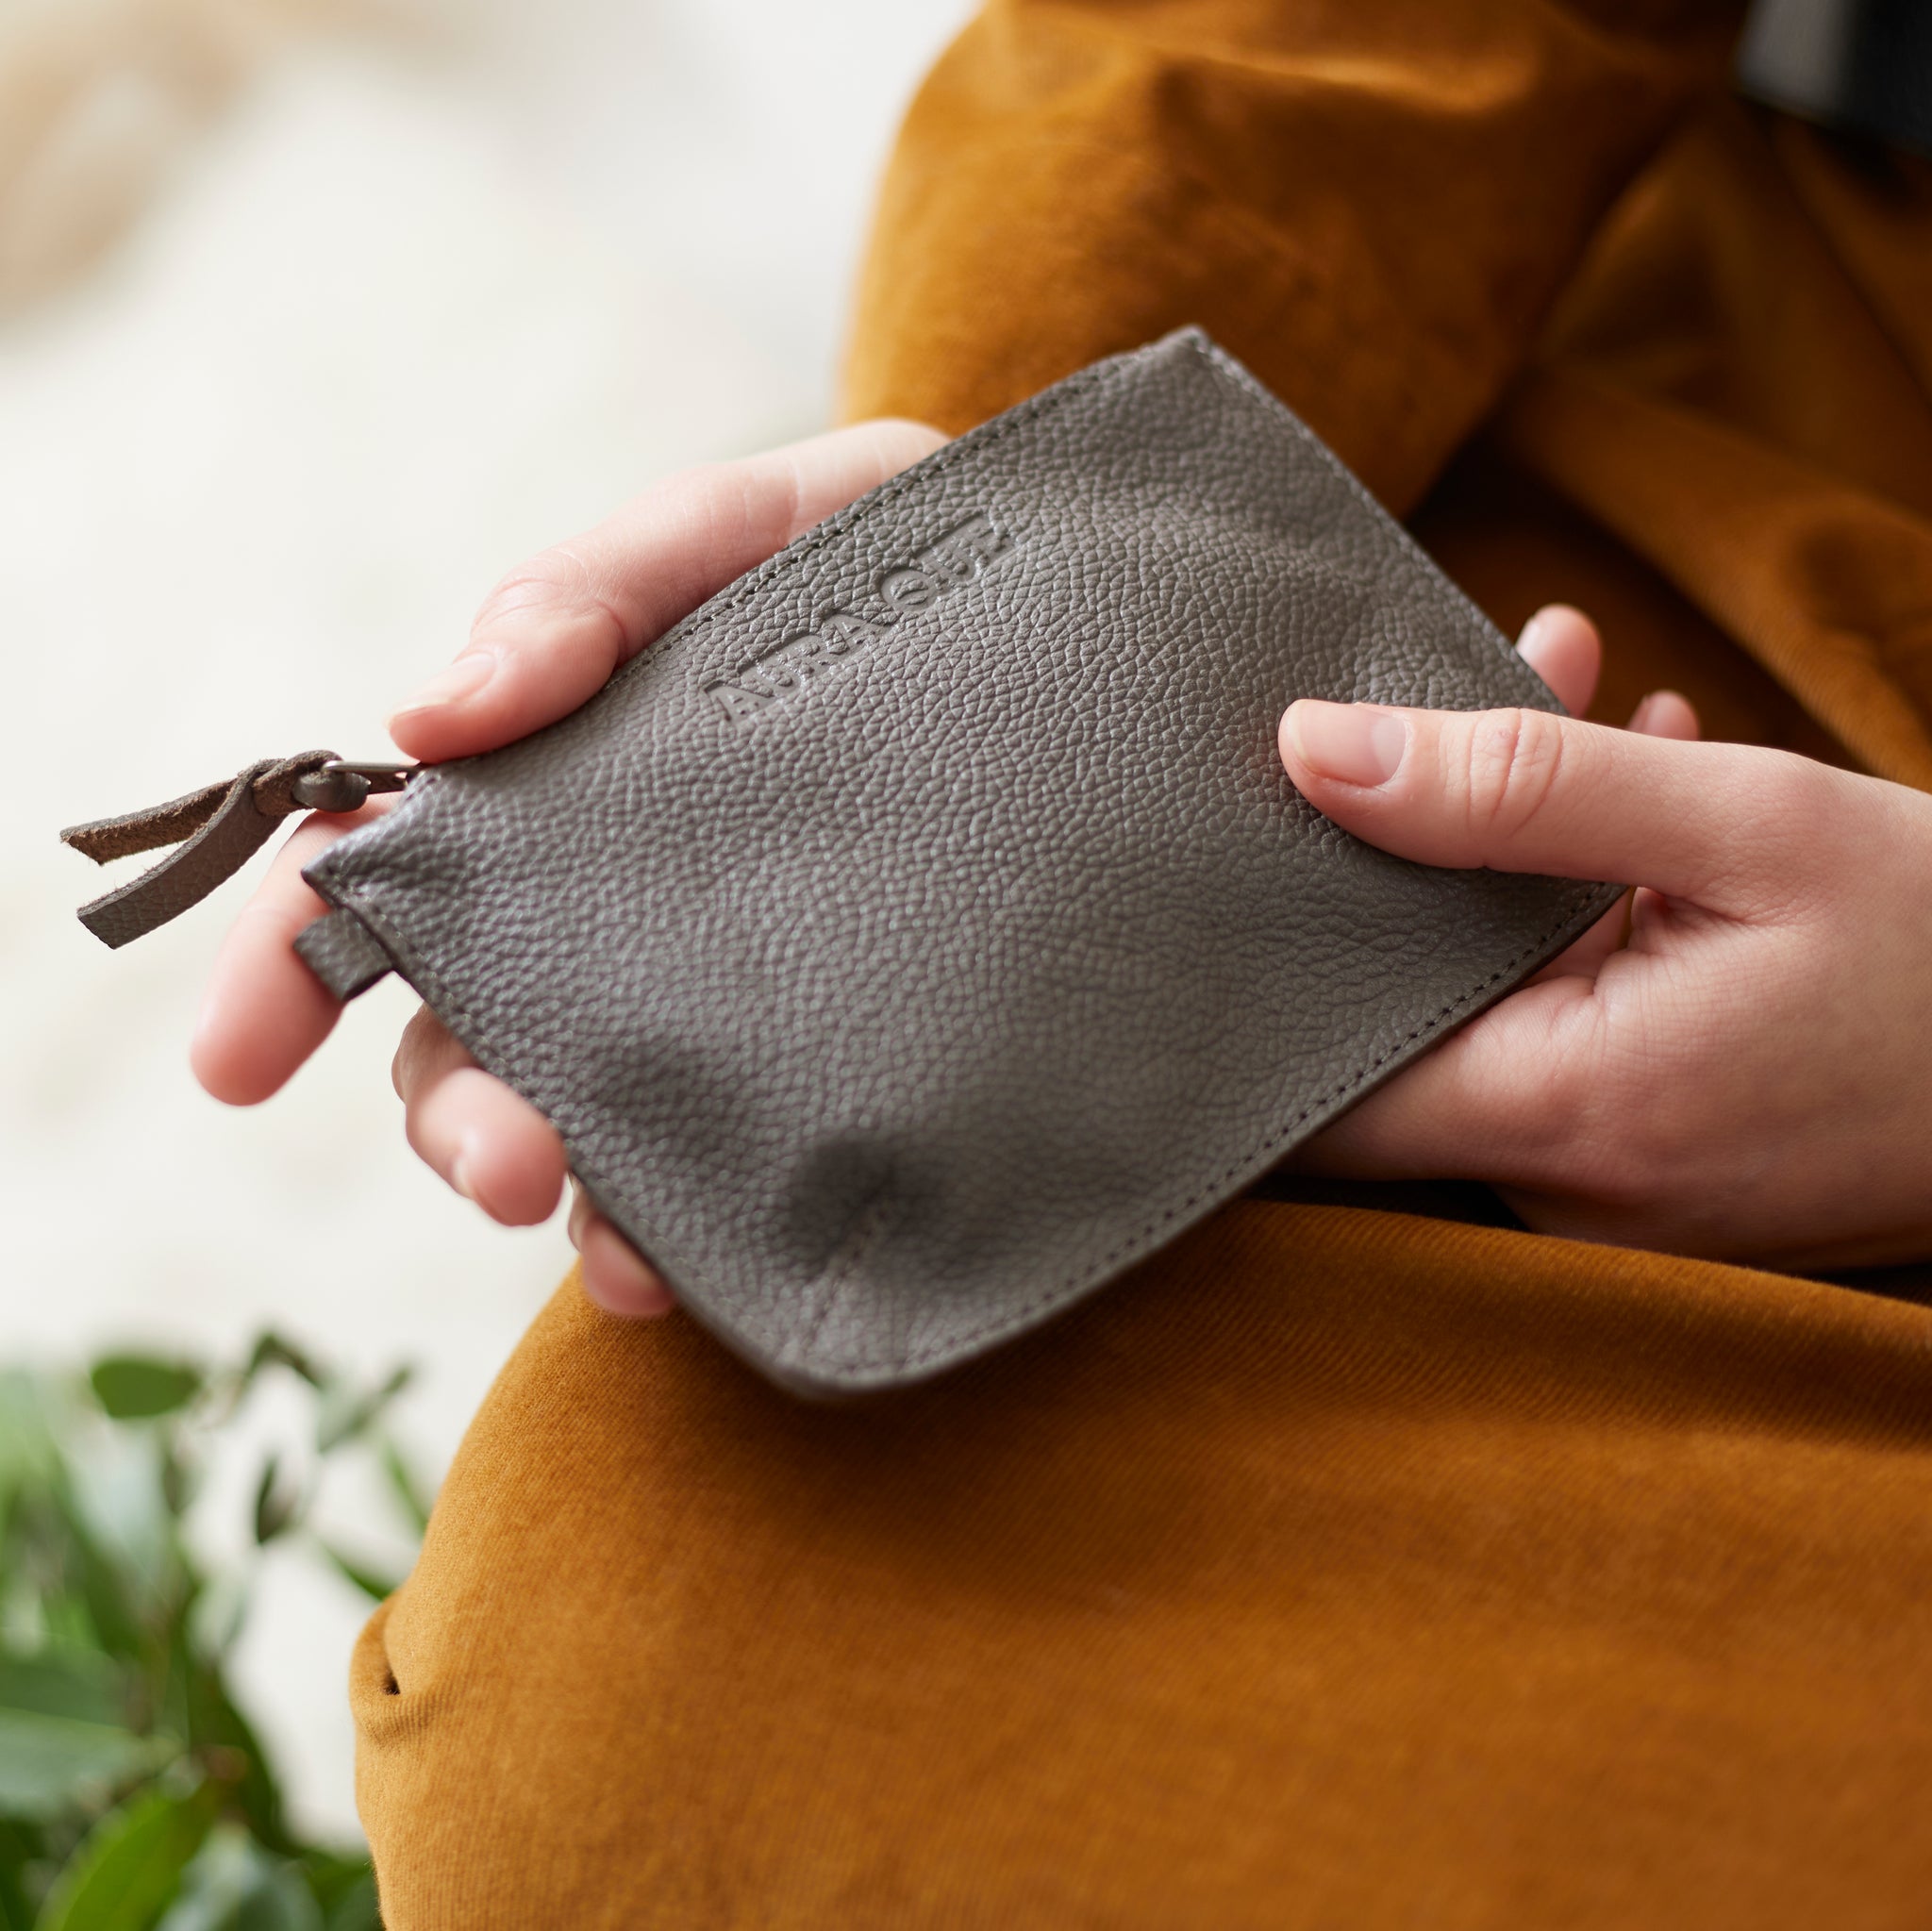 Beautiful Hnadmade Leather Coin Purse with Card Slots by Vida Vida – Vida  Vida Leather Bags & Accessories